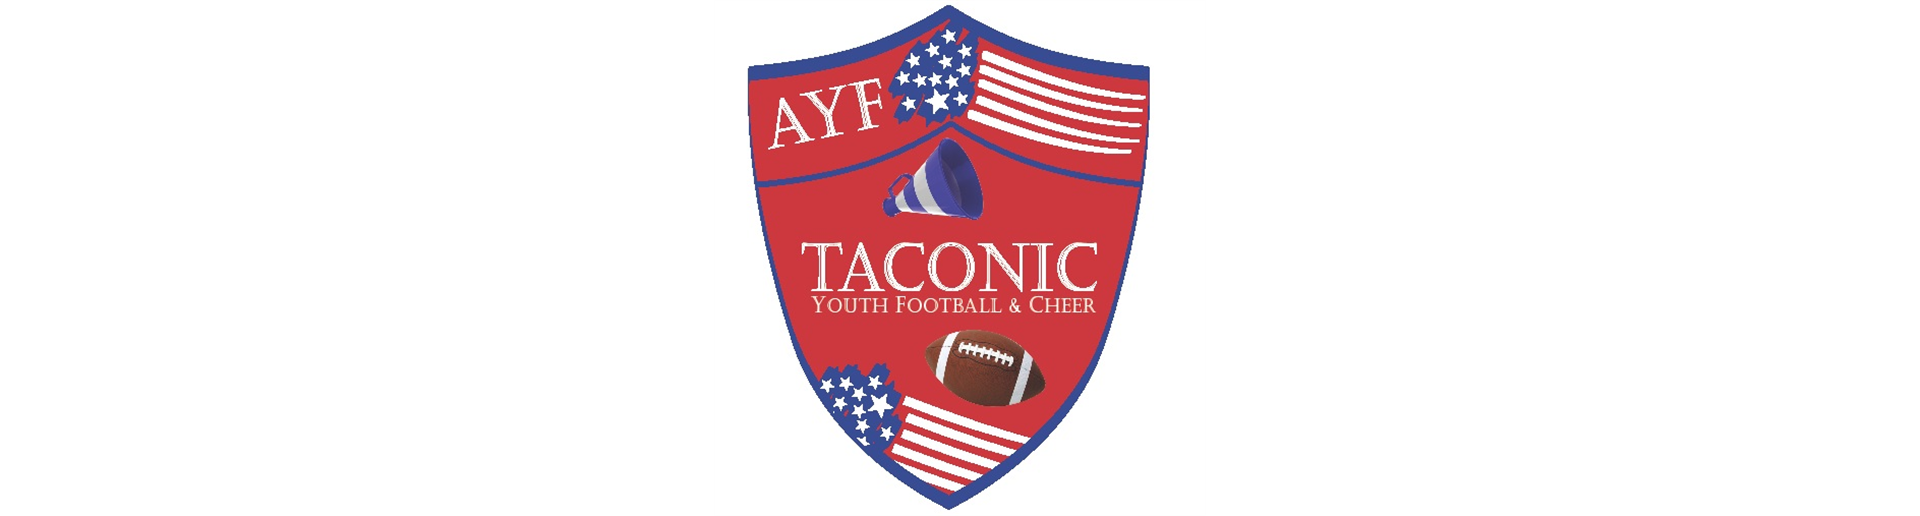 Welcome to the home of the TYFC !